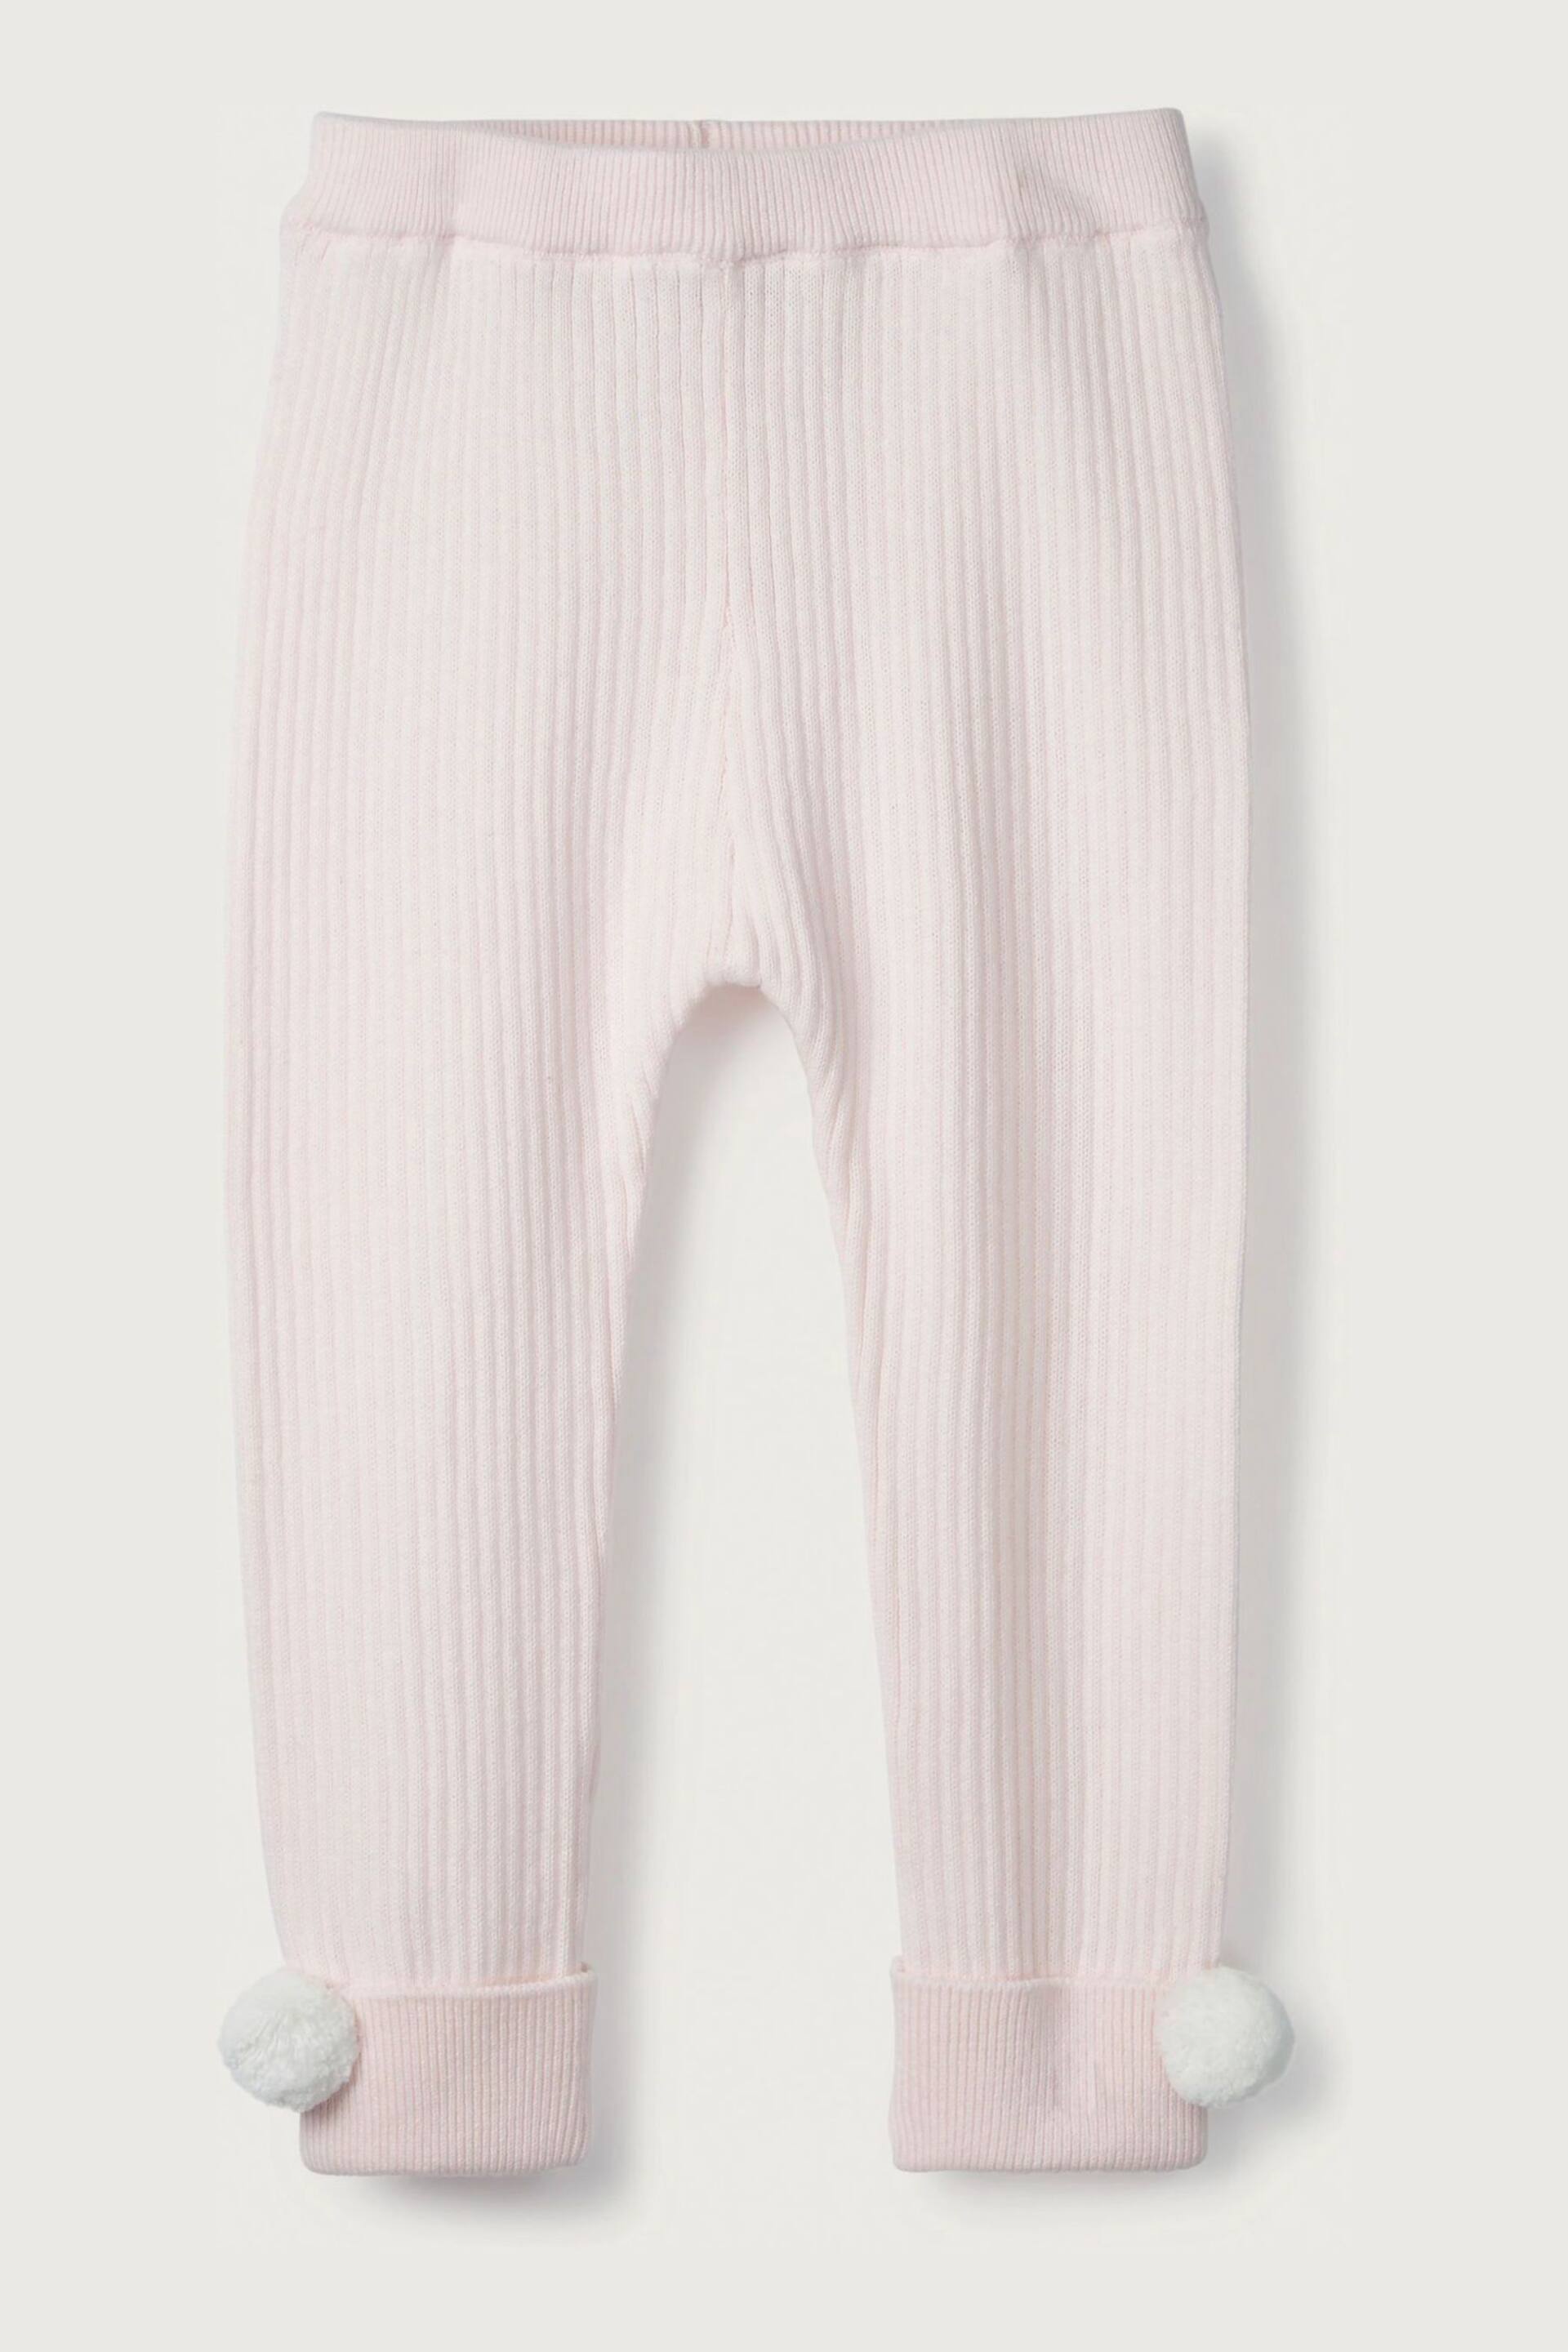 The White Company Pink Pom Knitted Leggings - Image 3 of 4